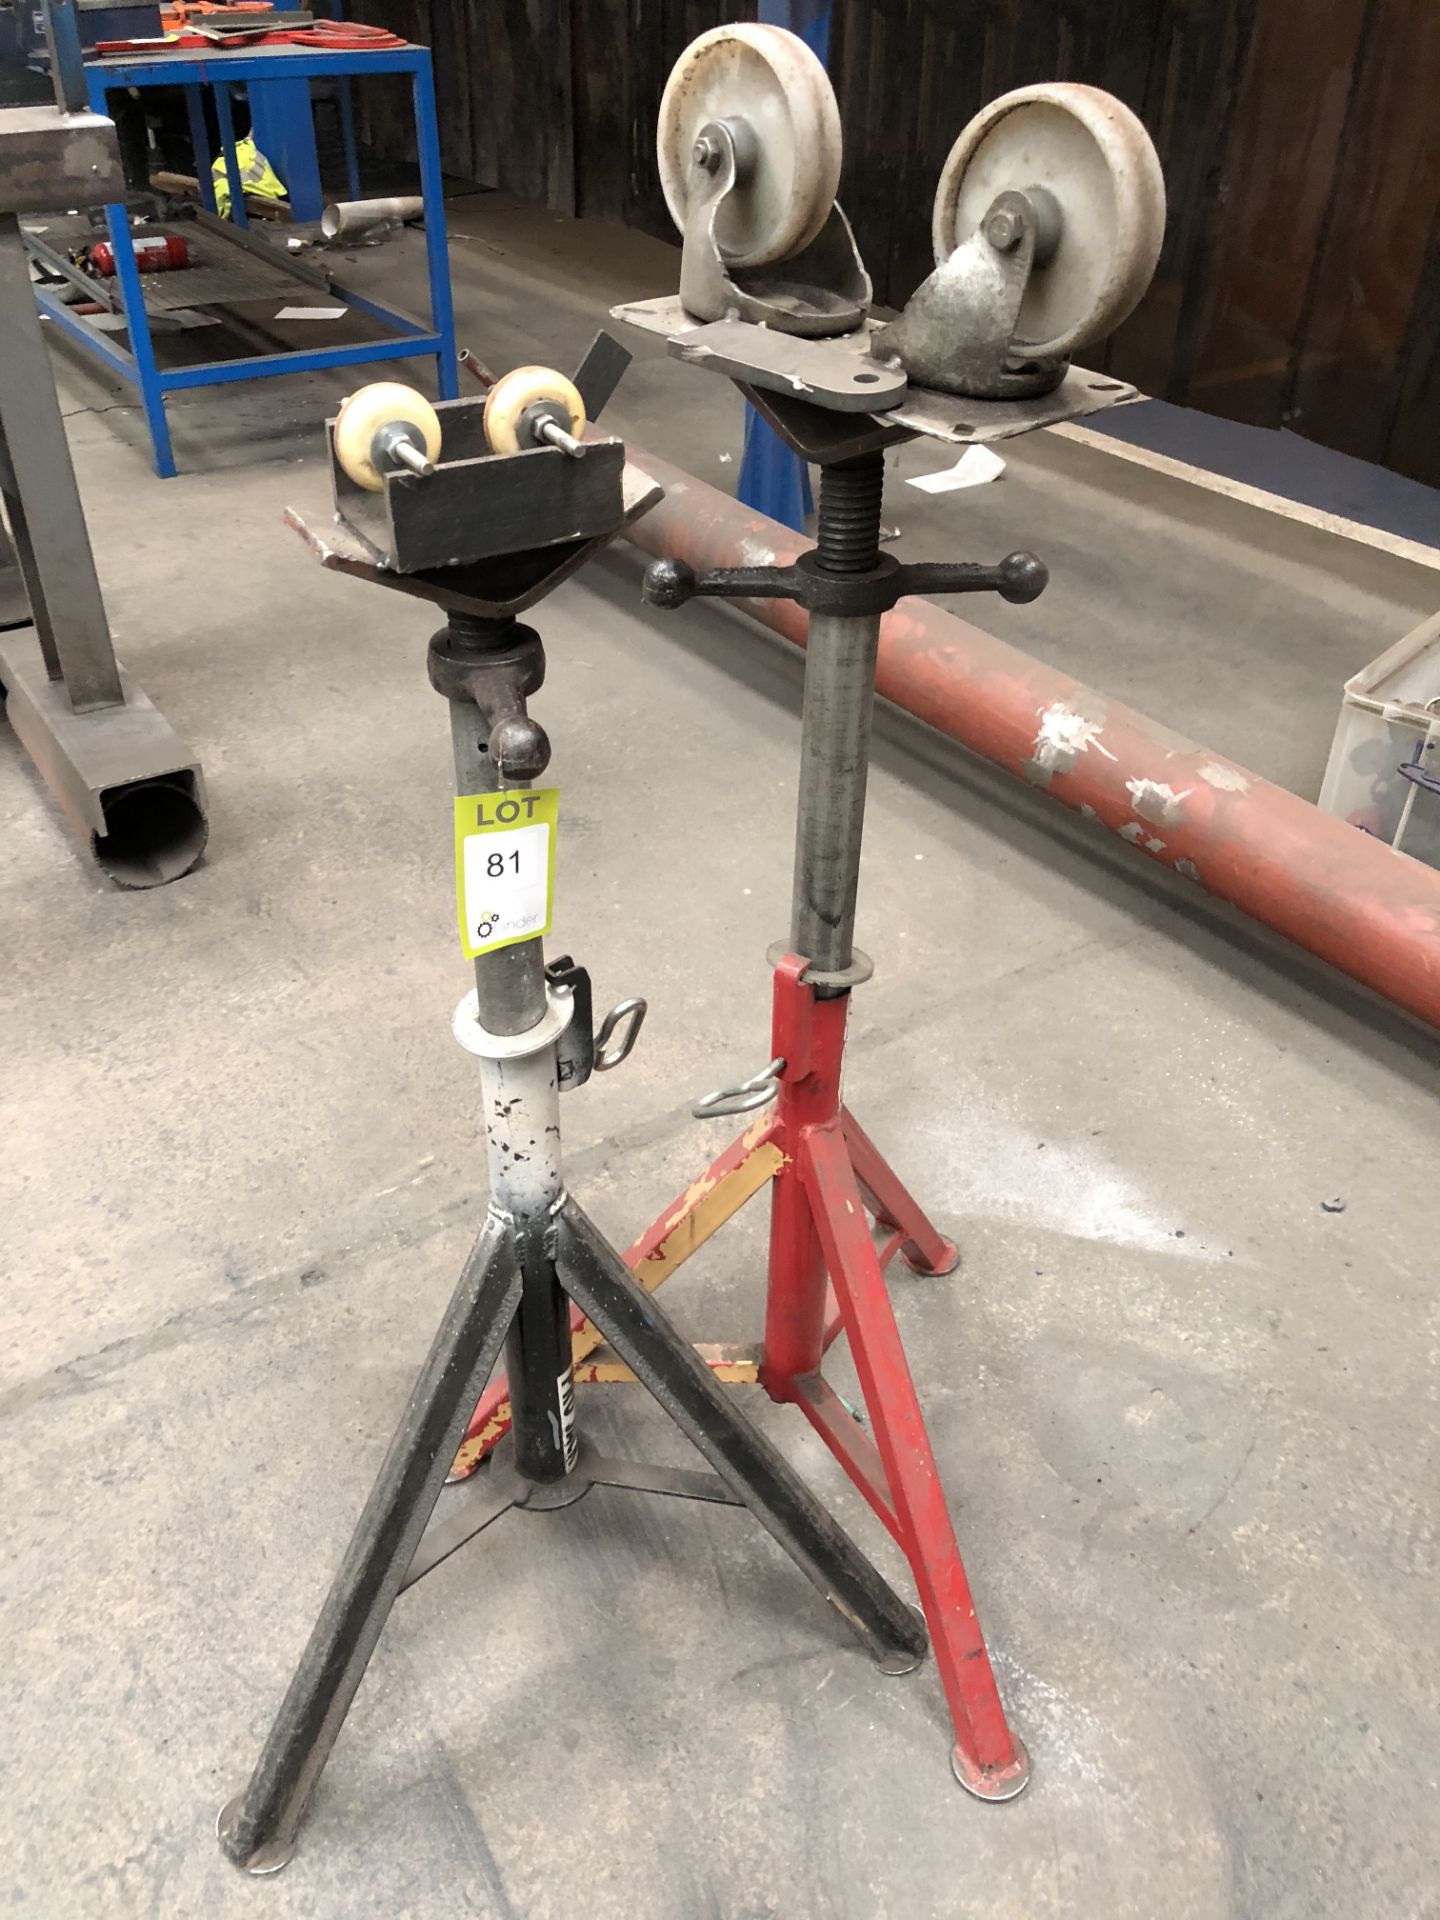 Pair adjustable Work Stands (located in Bay 3b)